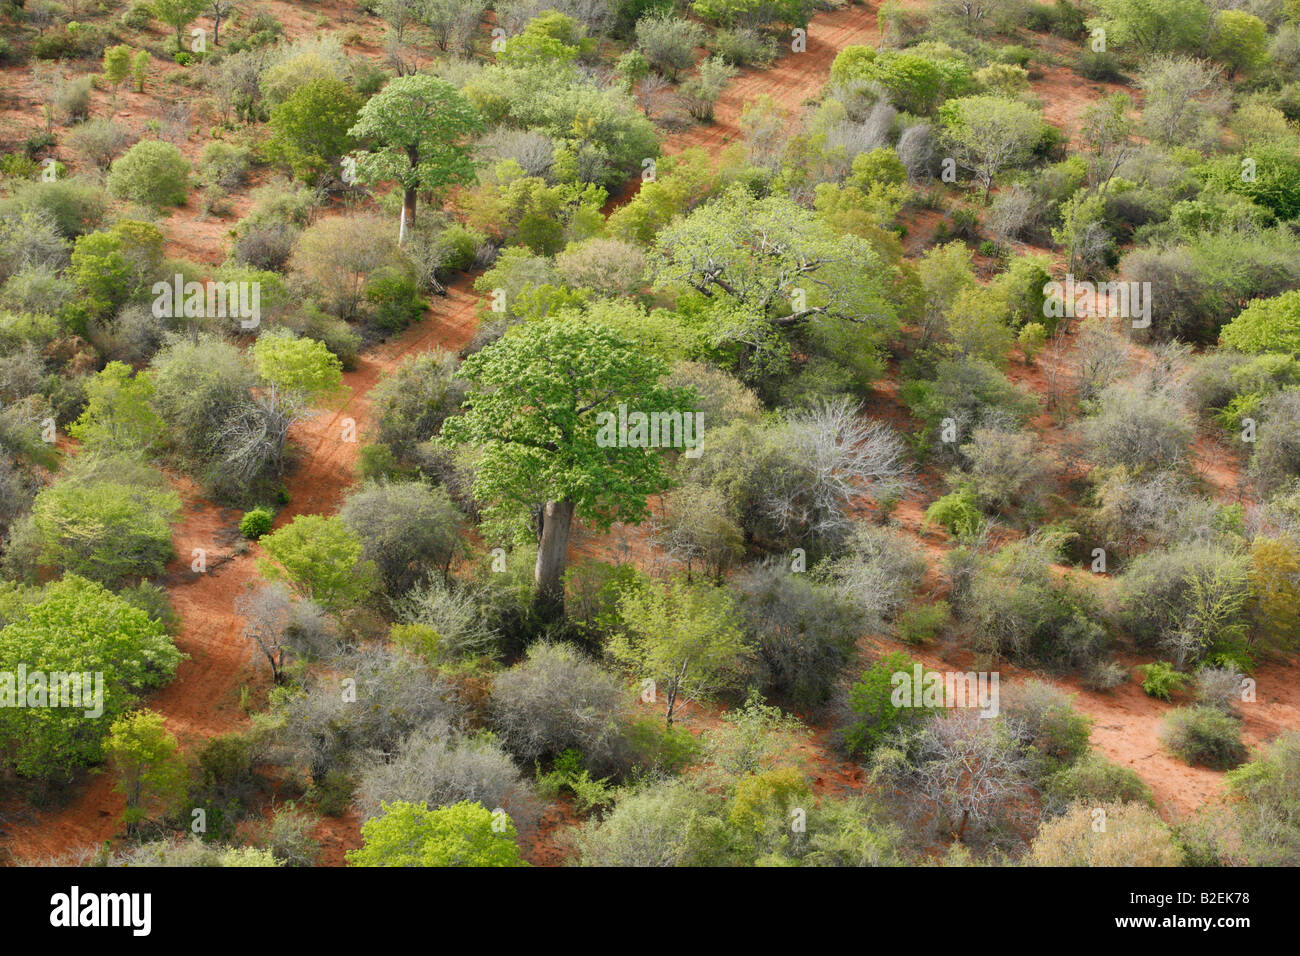 Aerial view road meandering between Baobab (Adansonia digitata) trees in a remote part of Mozambique Stock Photo